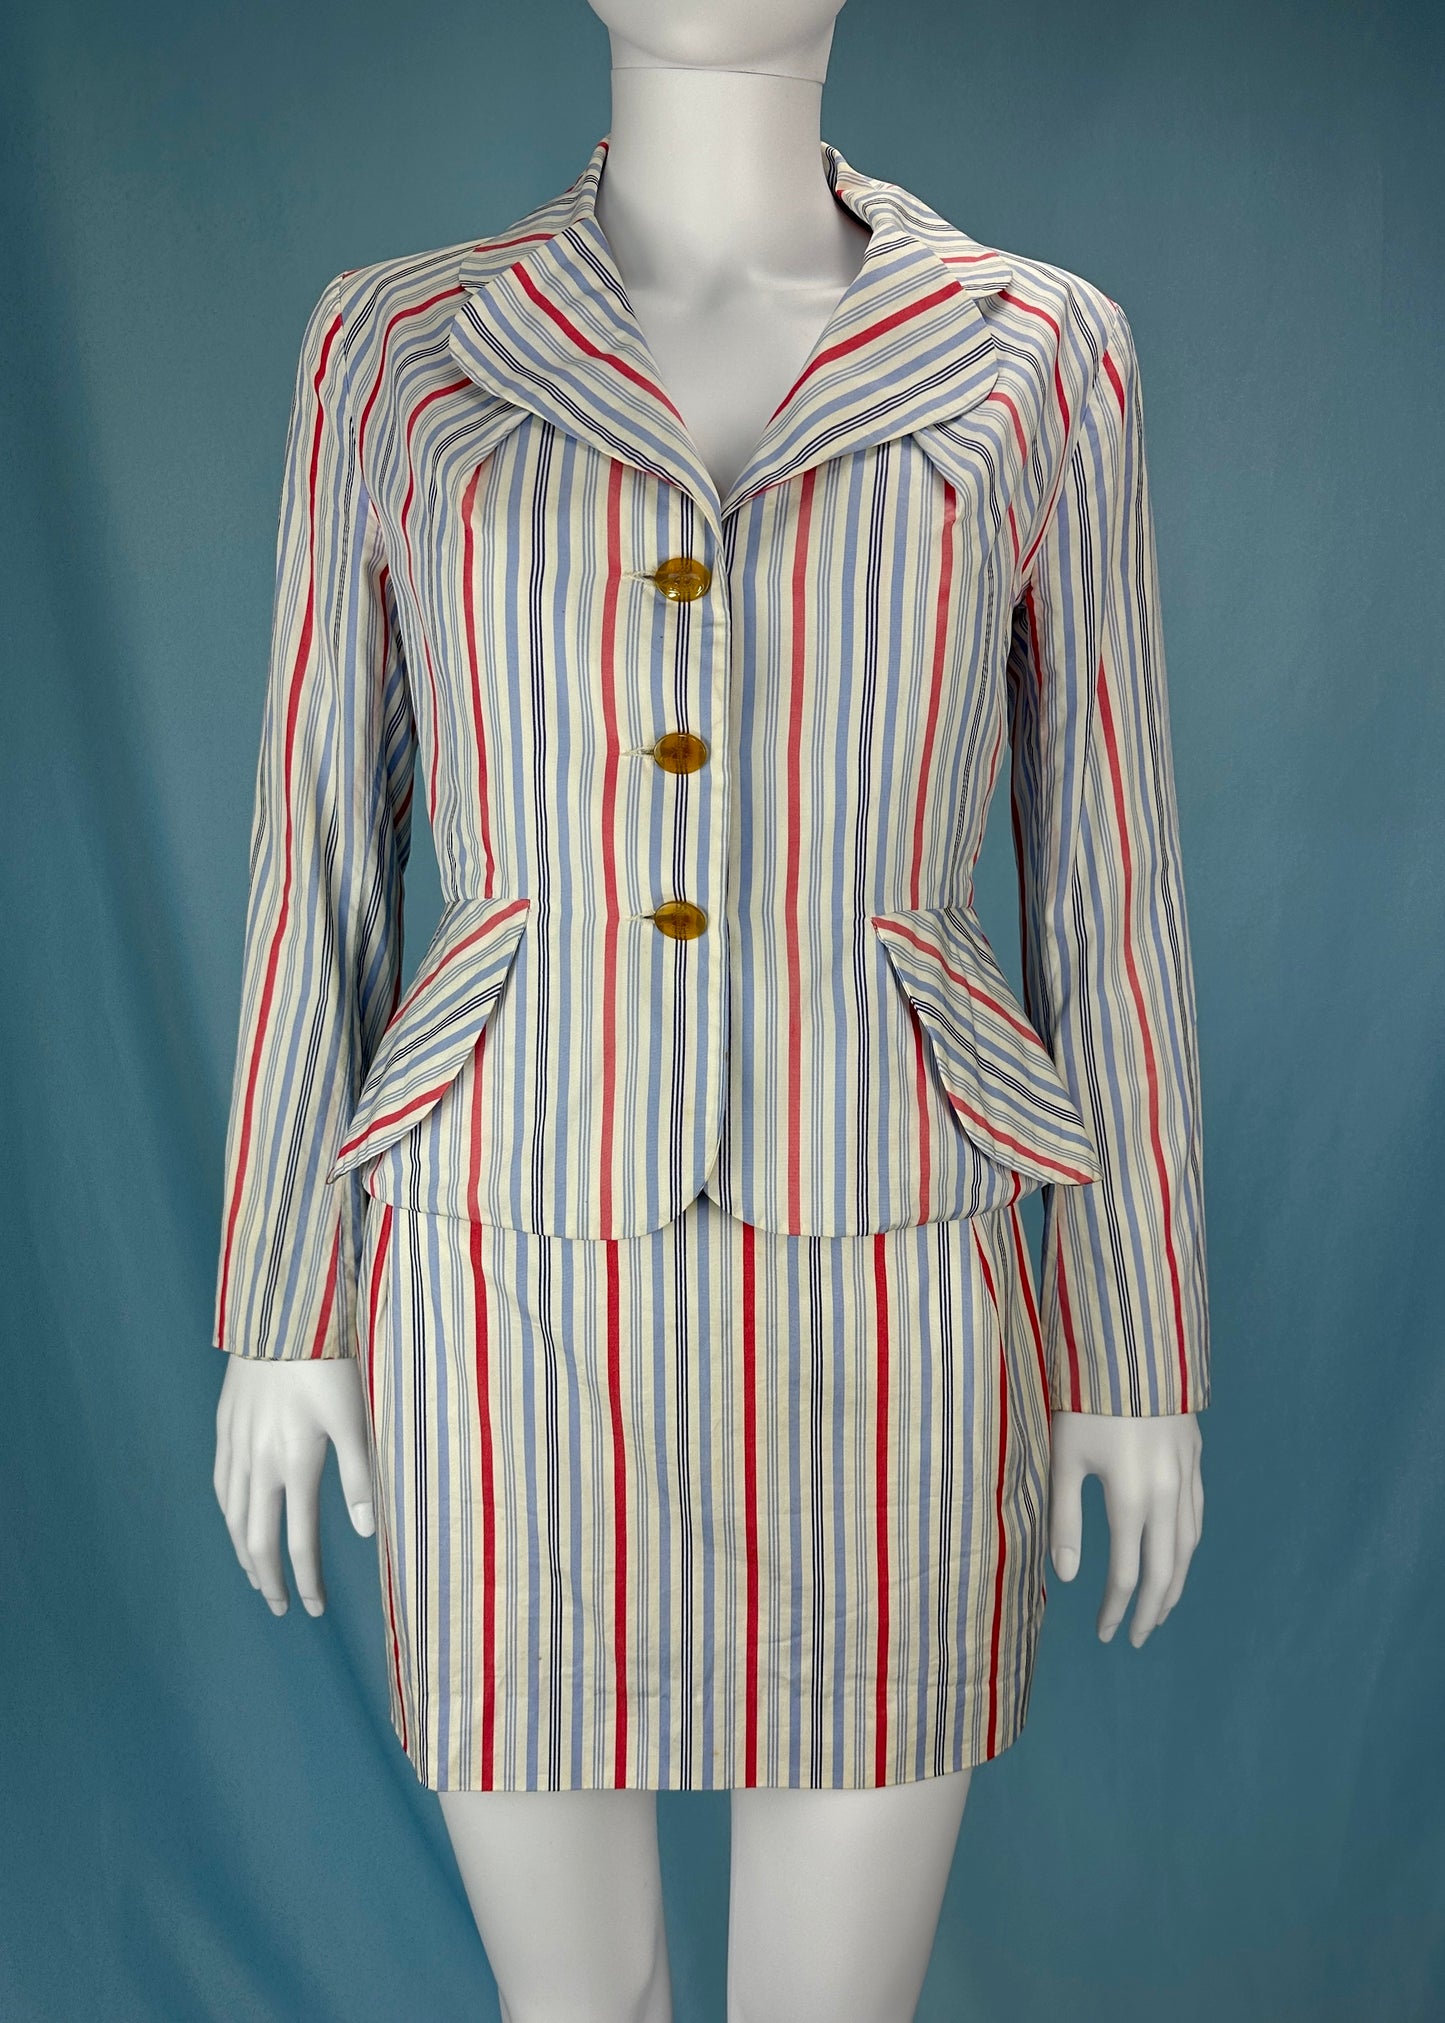 Vivienne Westwood Spring 1994 “Cafe Society” Runway Feather Bustle Striped Skirt & Jacket Suit Set